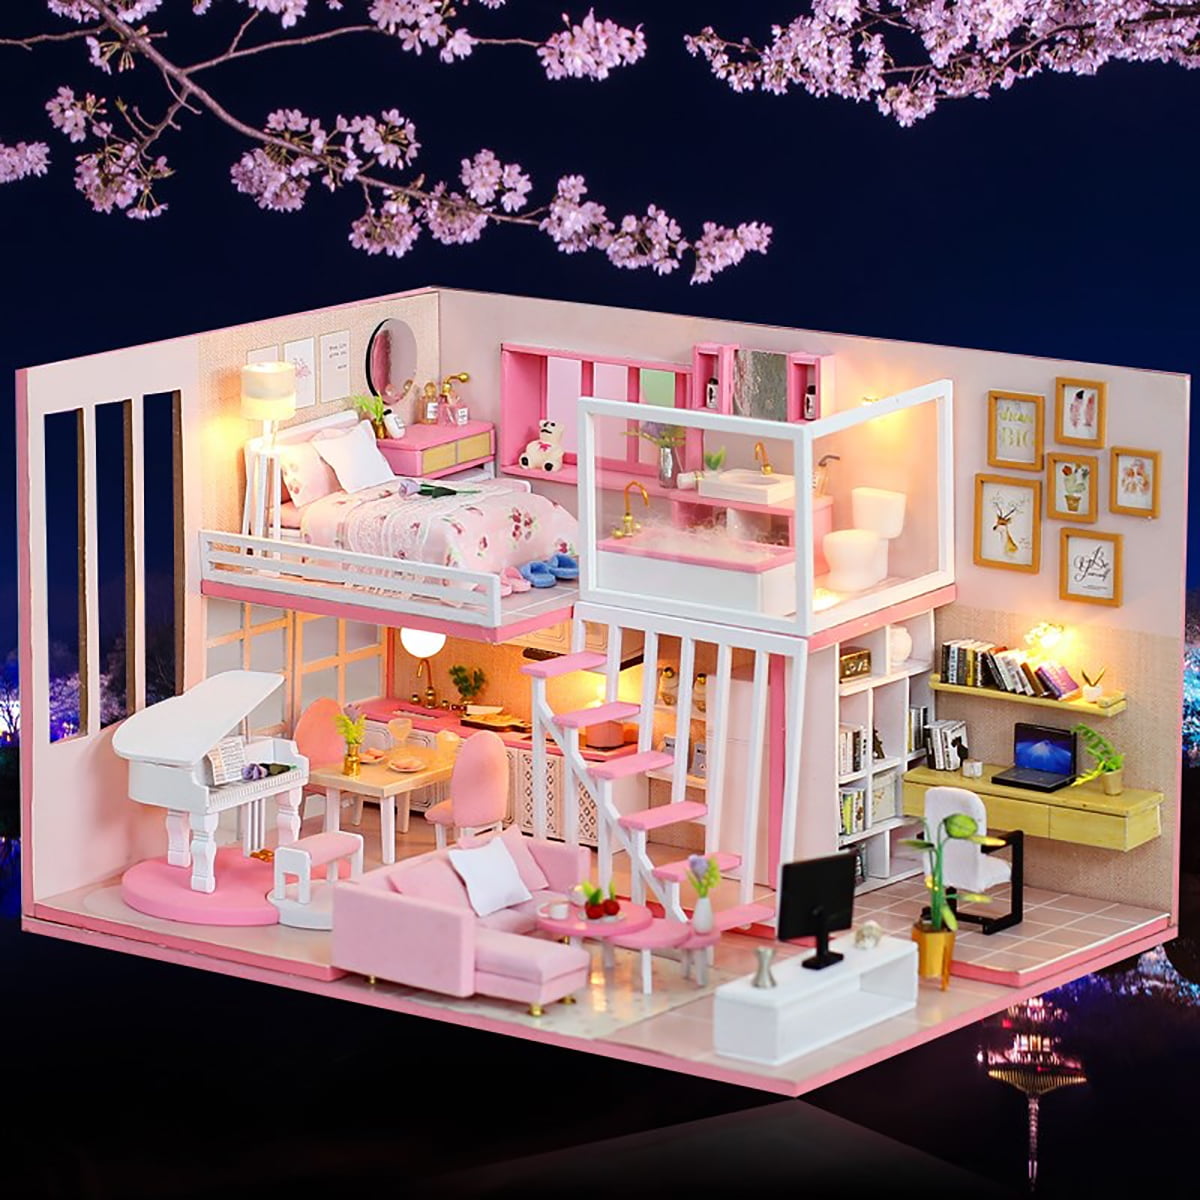 Details about   Doll House Furniture Assemble Wooden Miniature Dollhouse DIY Toy Gift for Kids 